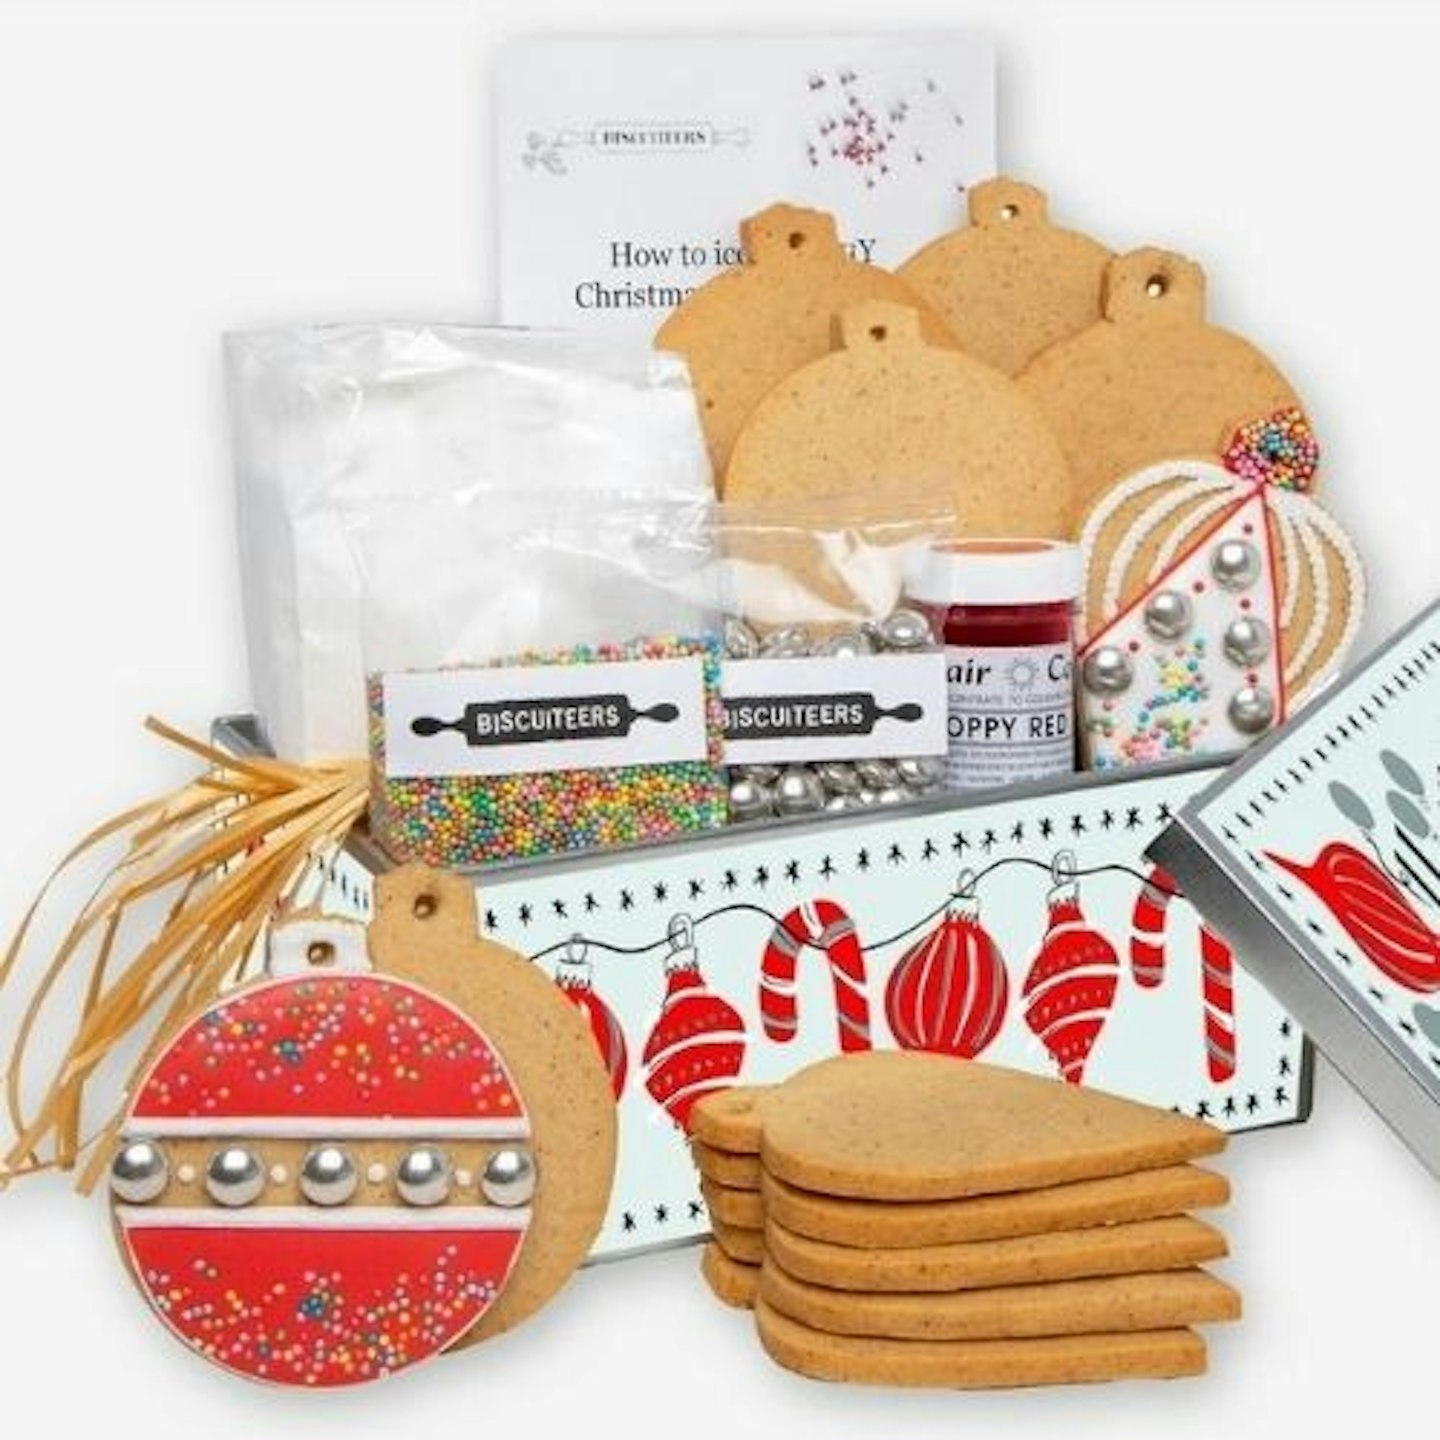 The best cookie decorating kits: Baubles Biscuit Decorating Kit